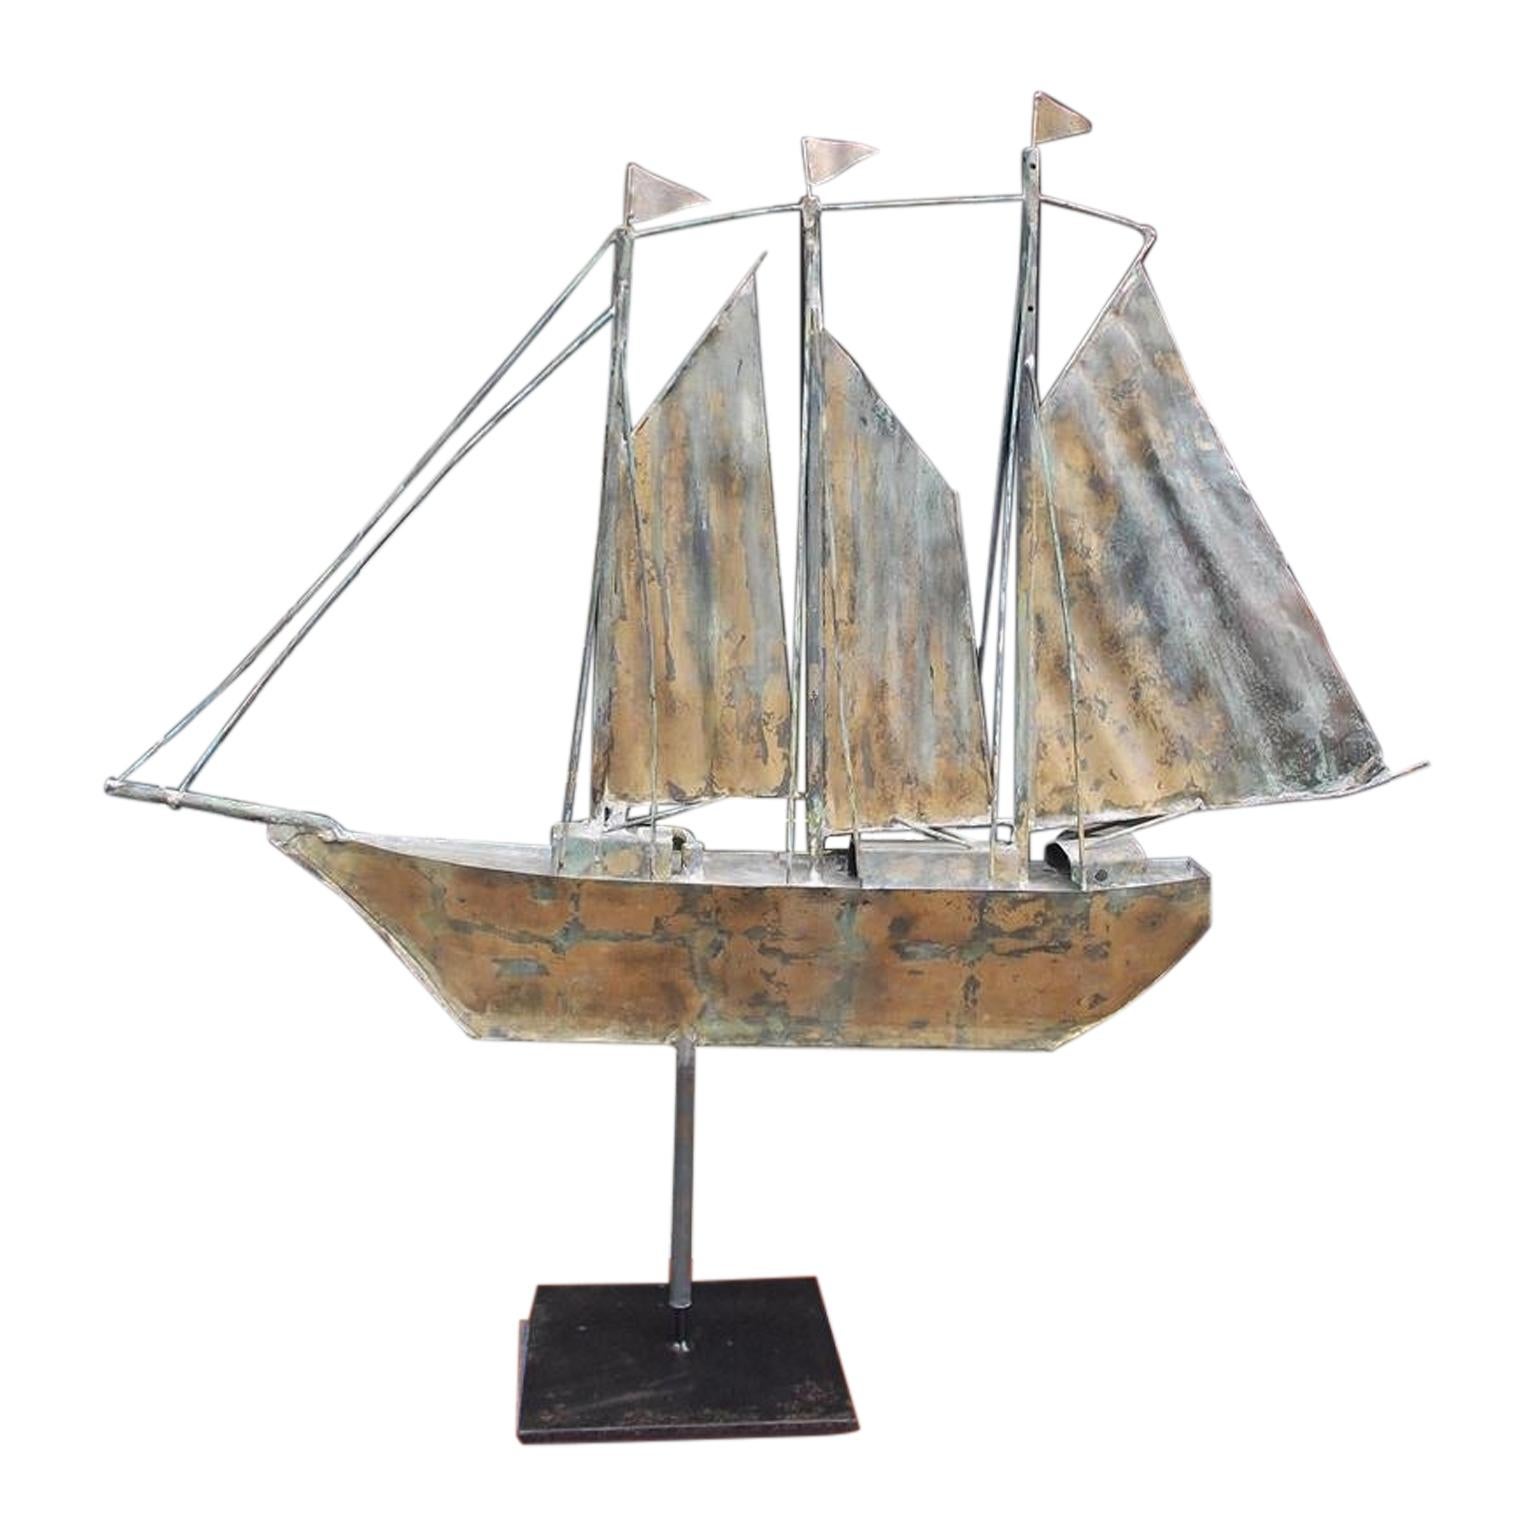 American Gilt Copper Three Masted Ship Weathervane Mounted on Stand, circa 1890 For Sale